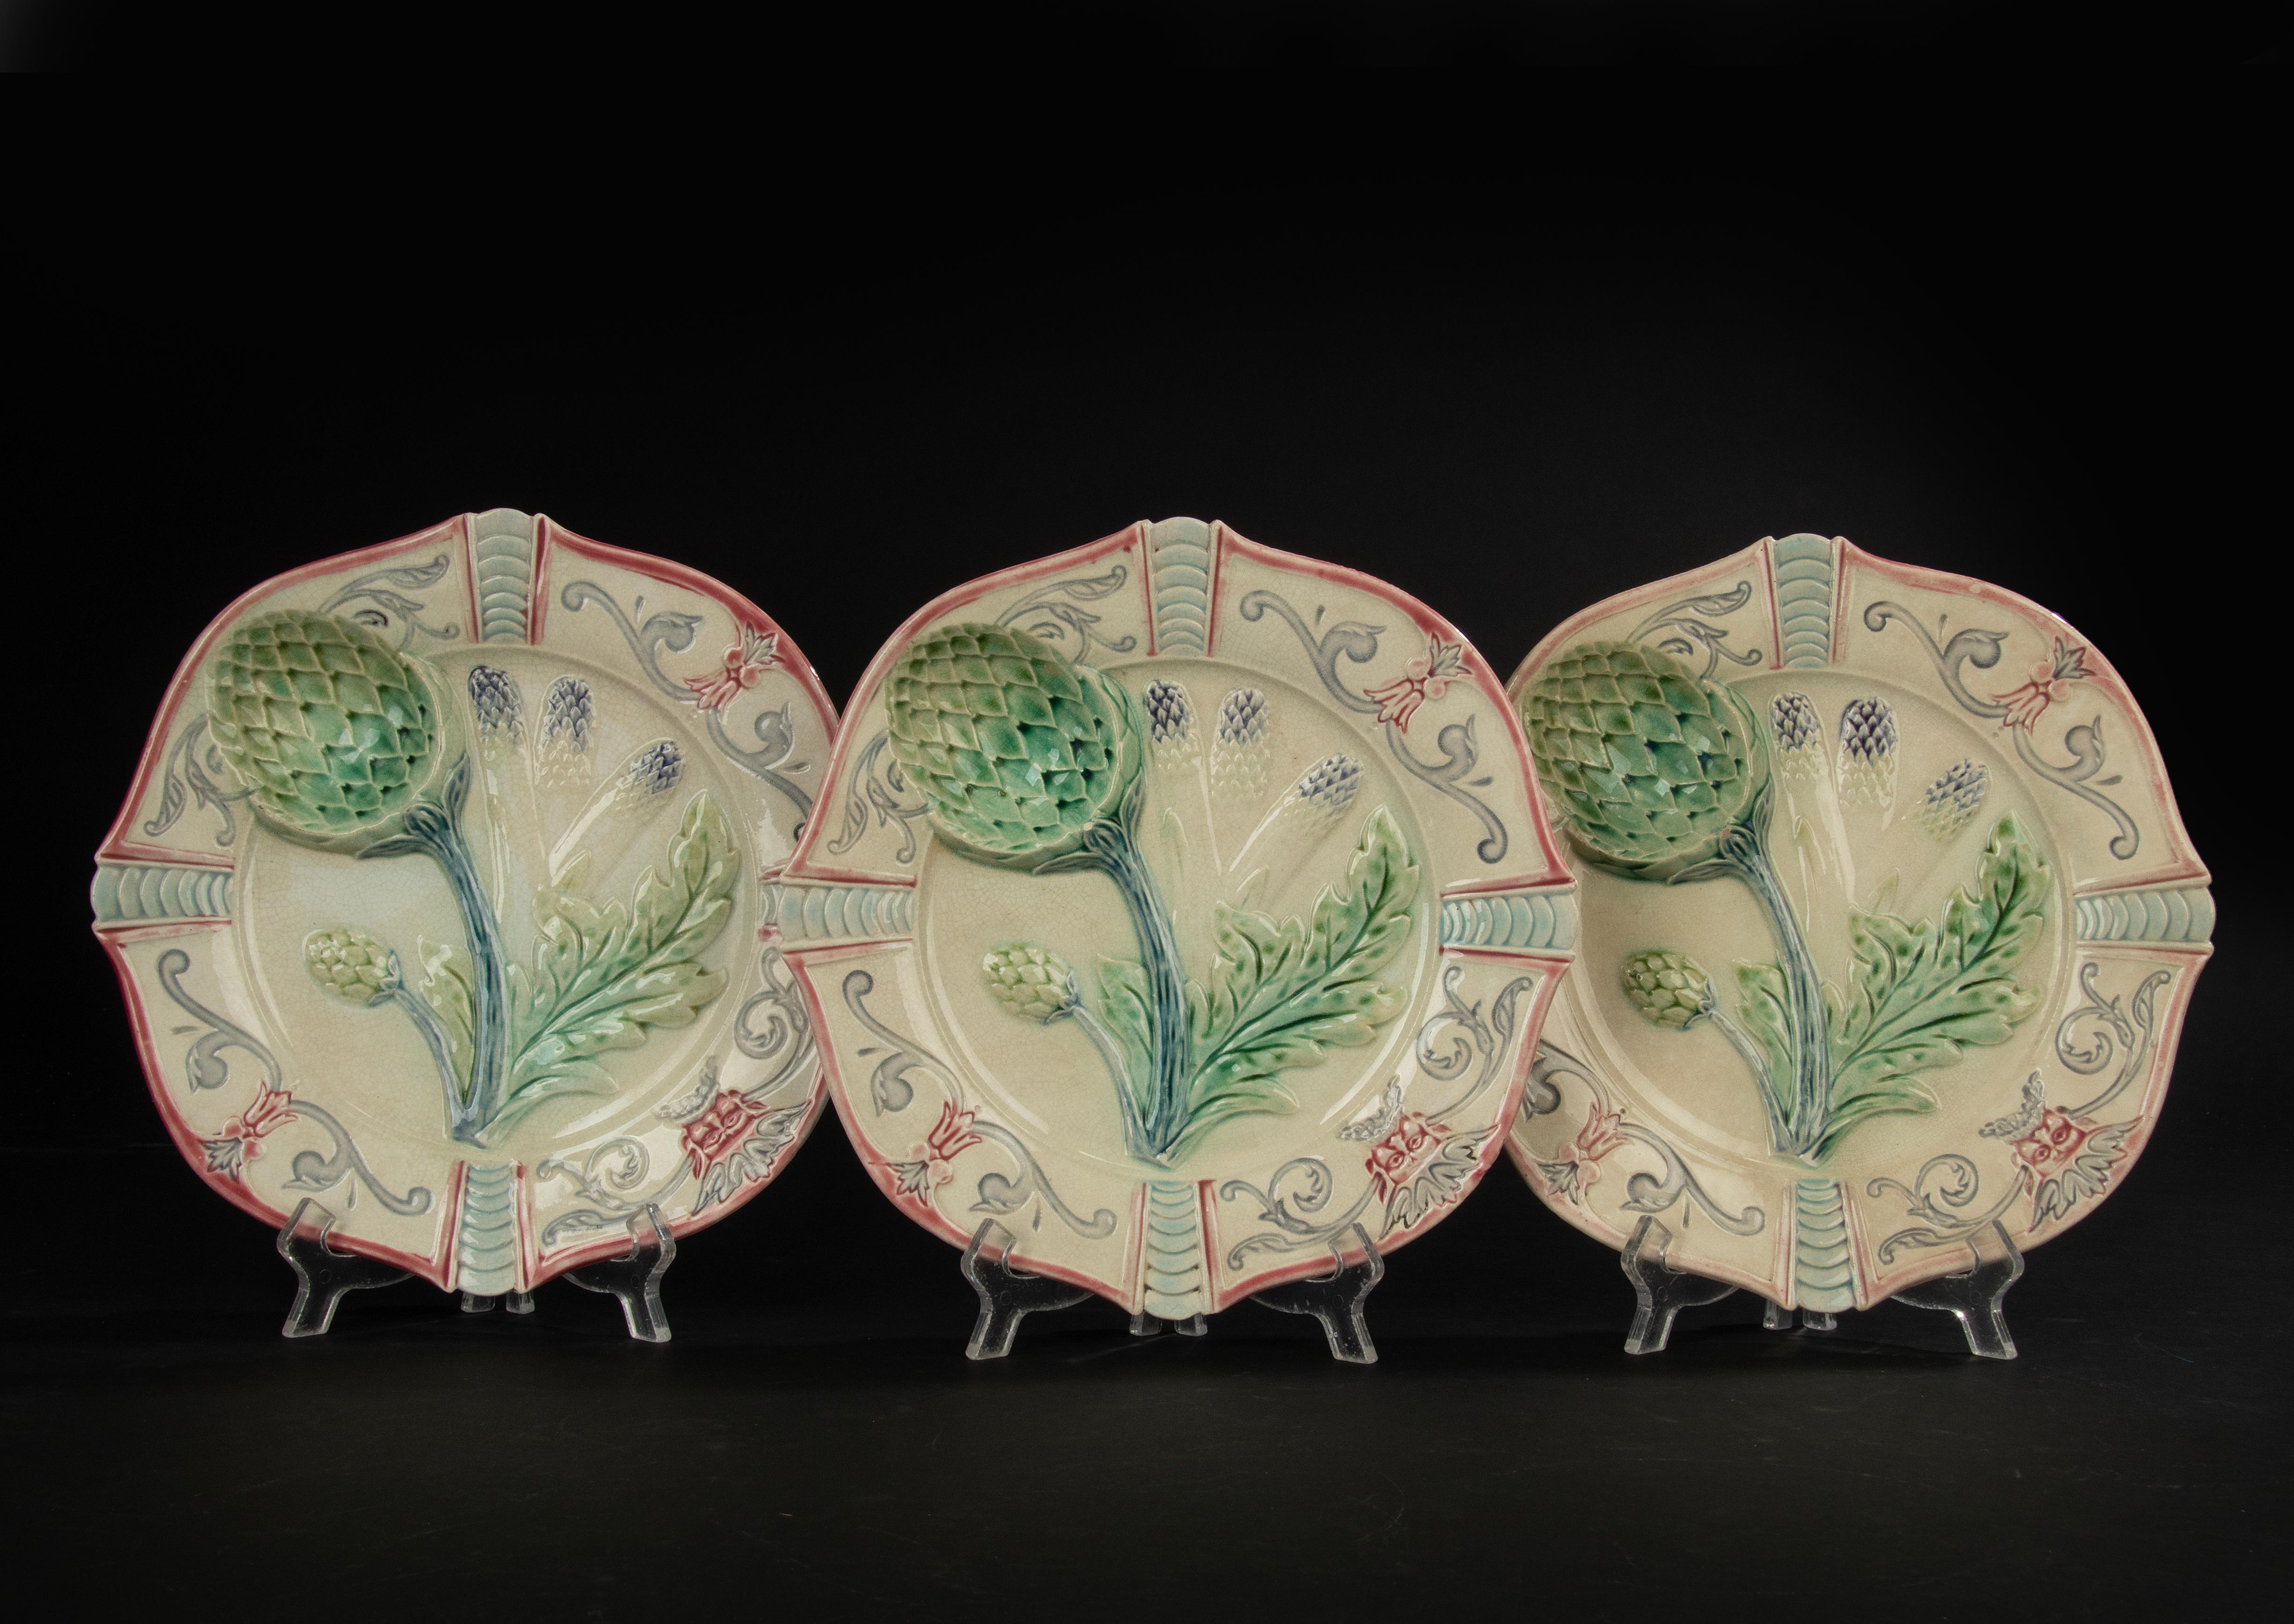 A nice set of 3 Ceramic majolica plates. The plates have beautiful decorations with artichoke and asparagus. The plates are marked, but the mark is not know. It might be Kueller and Guérin. 
The plates are in good condition, there are some small